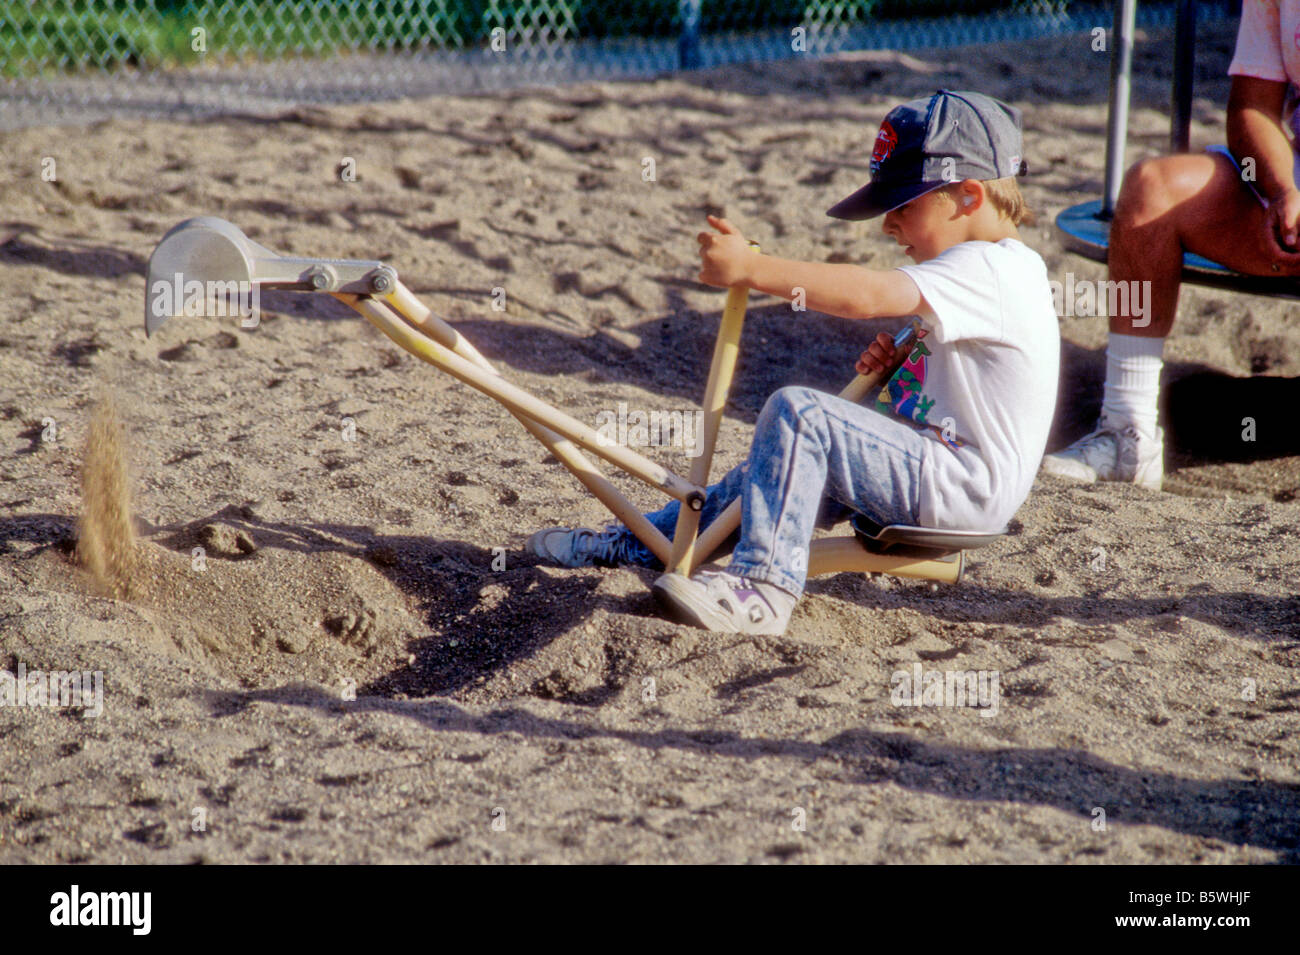 Boy plays with toy sand digger in city park playground Stock Photo